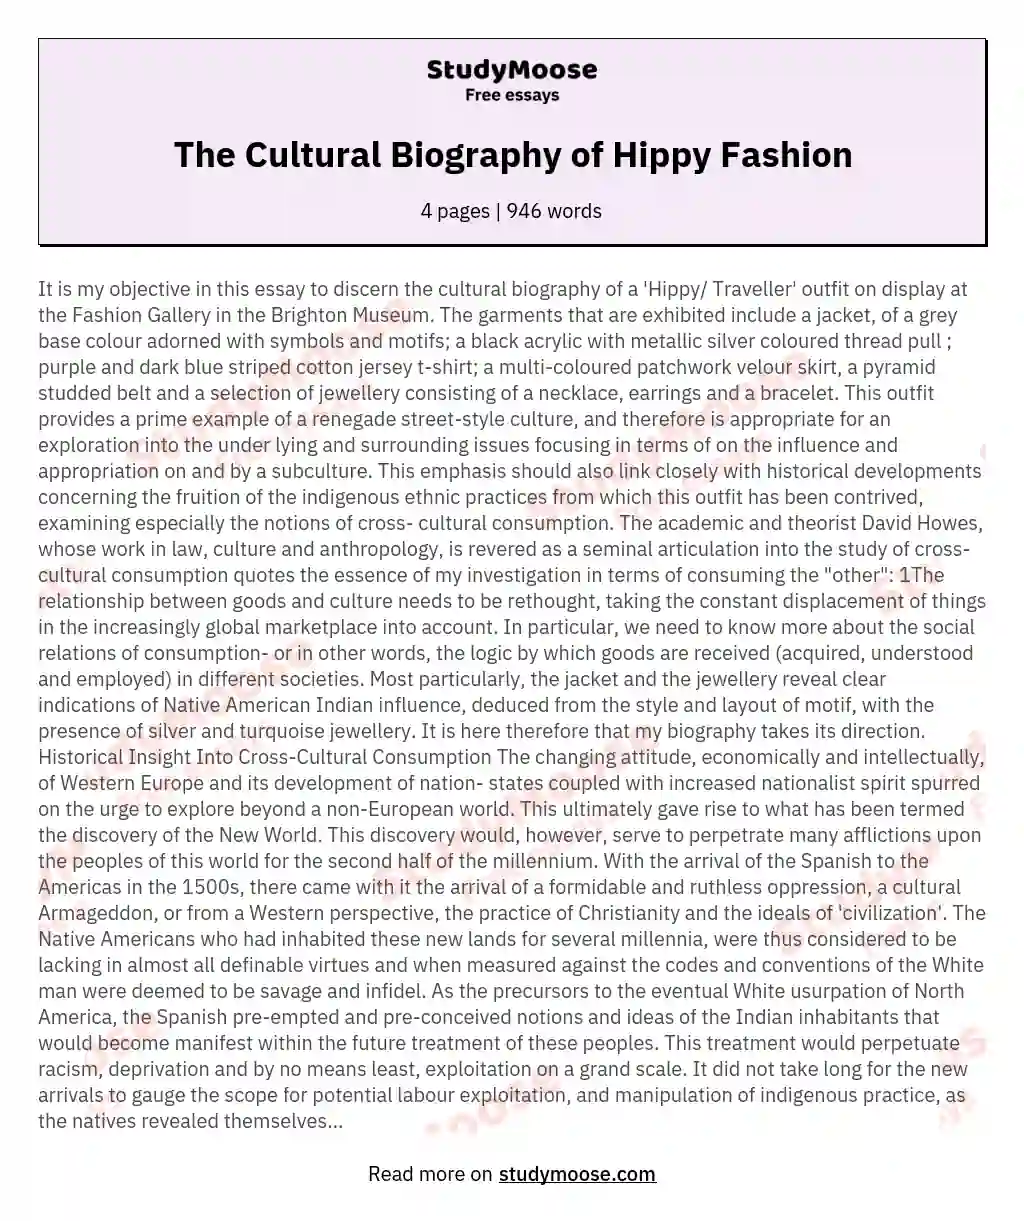 The Cultural Biography of Hippy Fashion essay